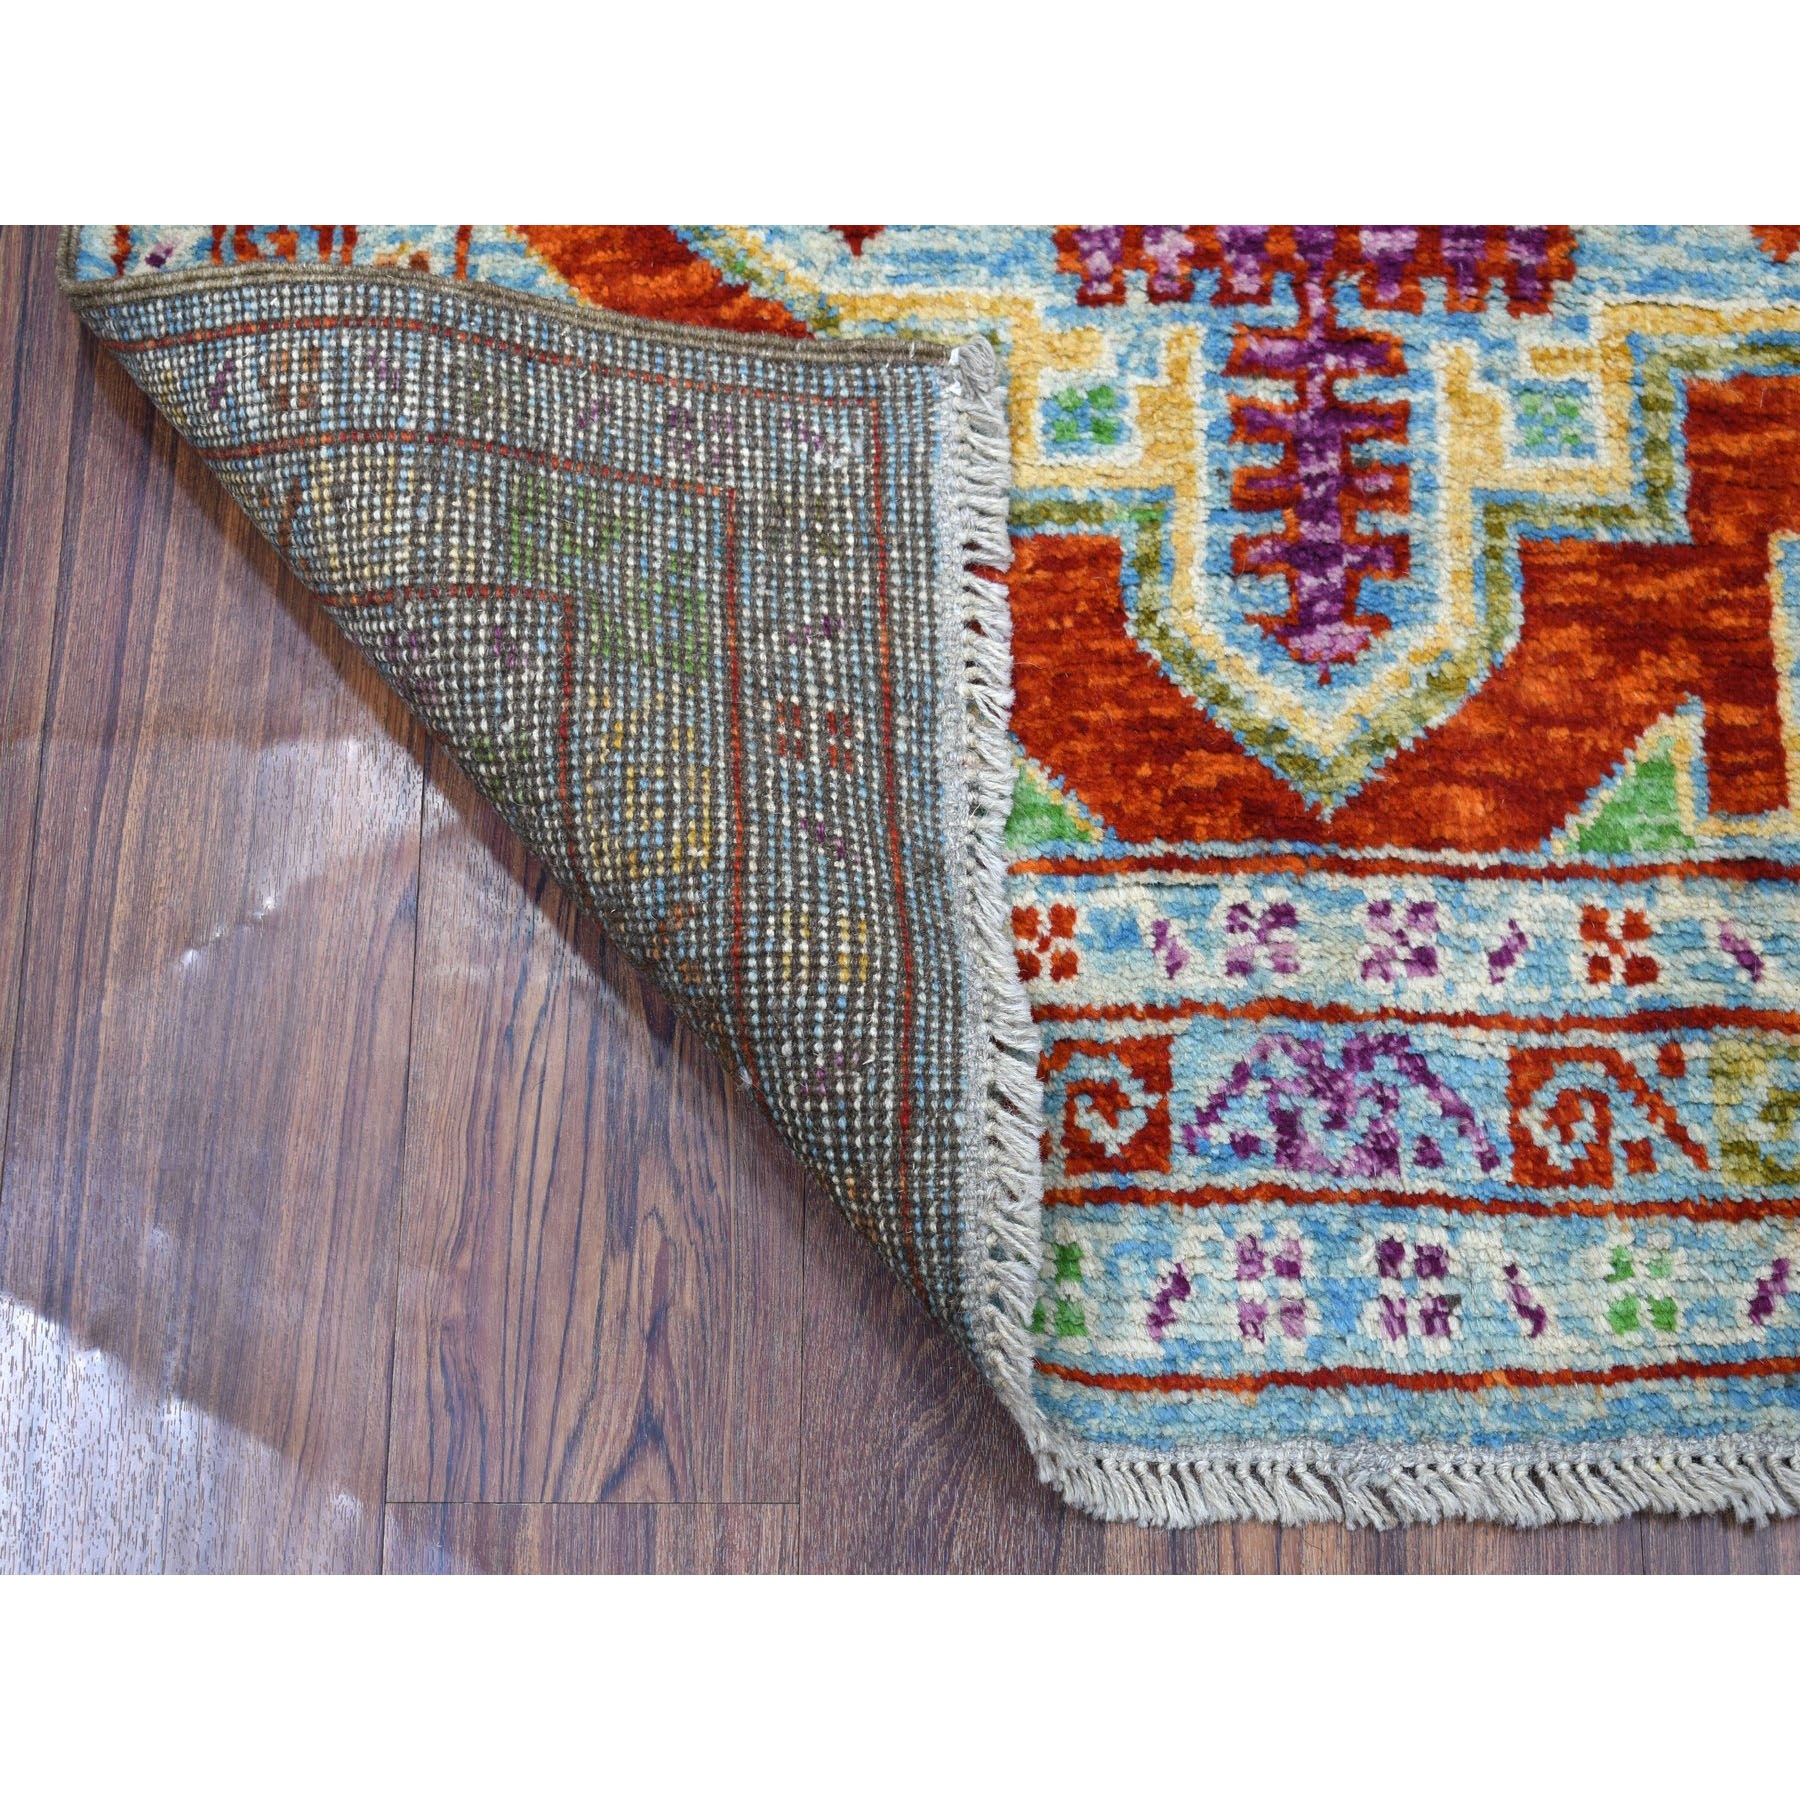 3-4 x5- Blue Hand Knotted Colorful Afghan Baluch Geometric Design Pure Wool Oriental Rug 